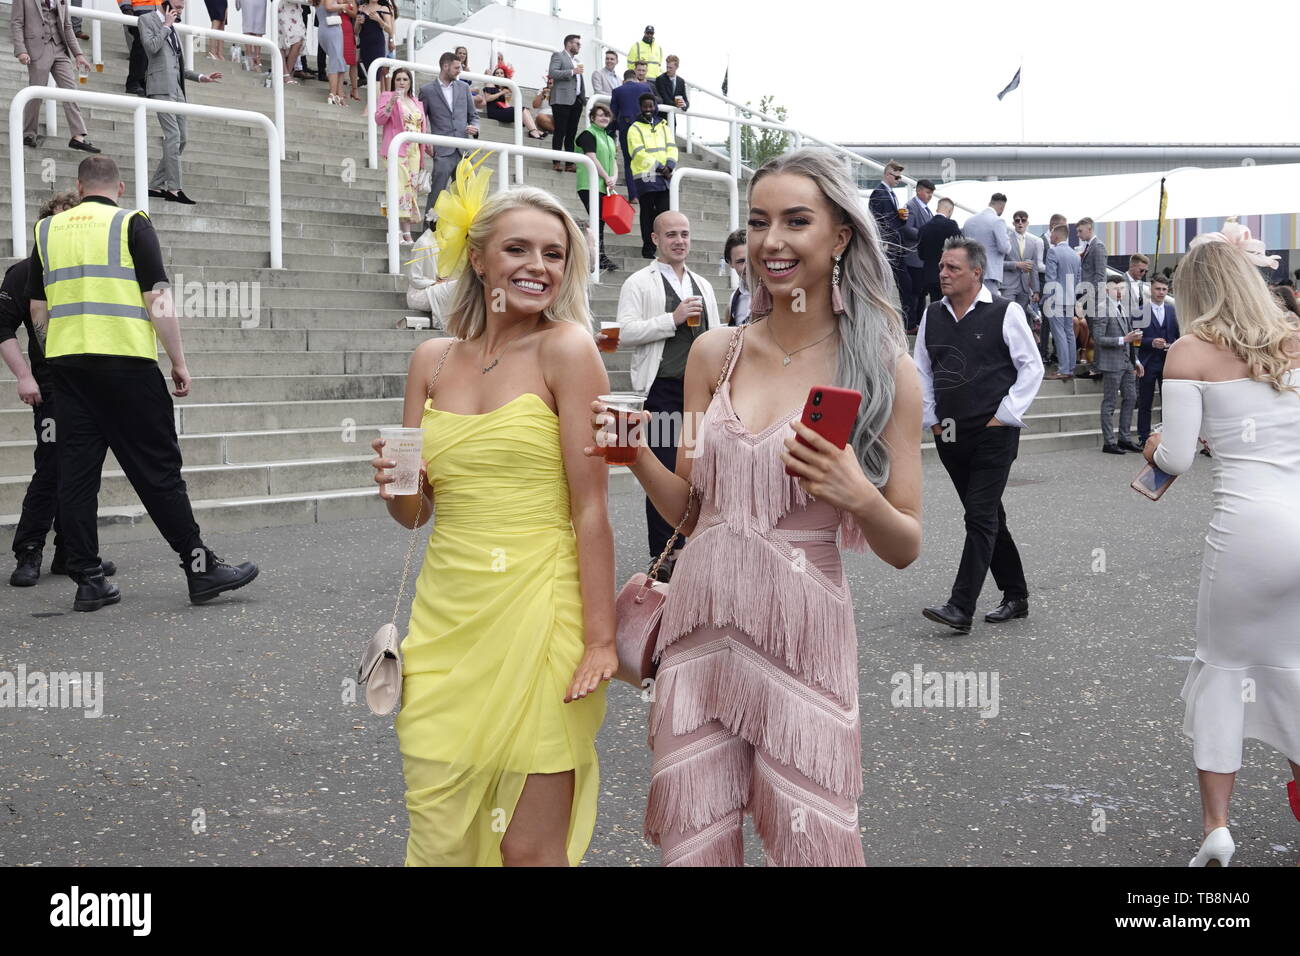 Epsom Downs, Surrey, UK. 31st May, 2019. Atmospheric scenes of punters prior to the start of racing at the Investec Derby Festival - on Ladies Day, classic horse race. Credit: Motofoto/Alamy Live News Stock Photo